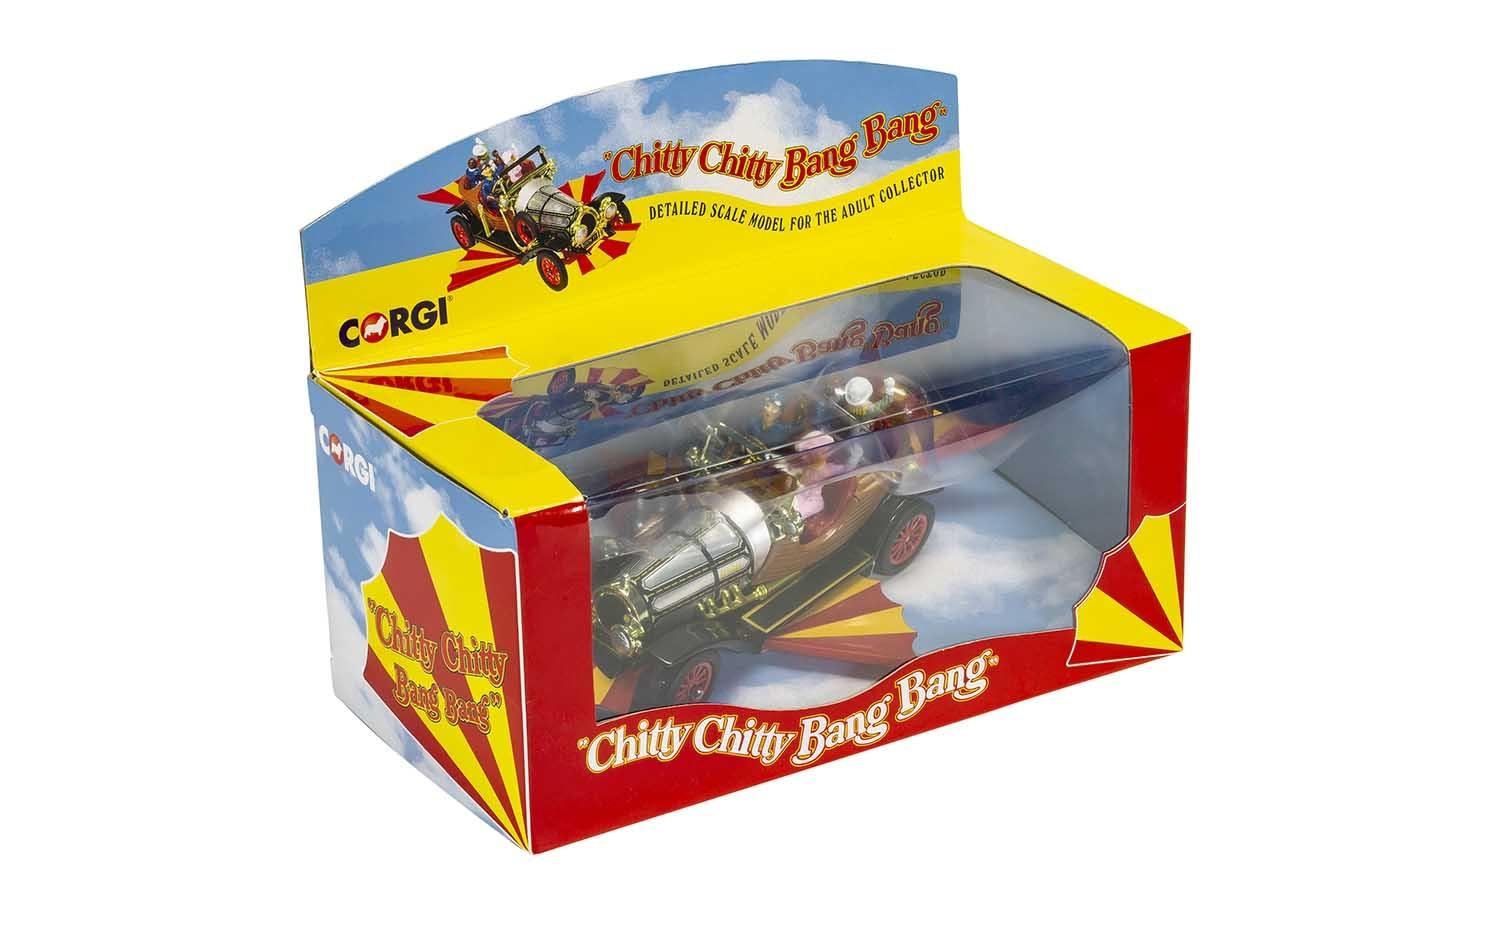 Chitty Chitty Bang Bang with figurines 1:45 scale model from Corgi, CC03502